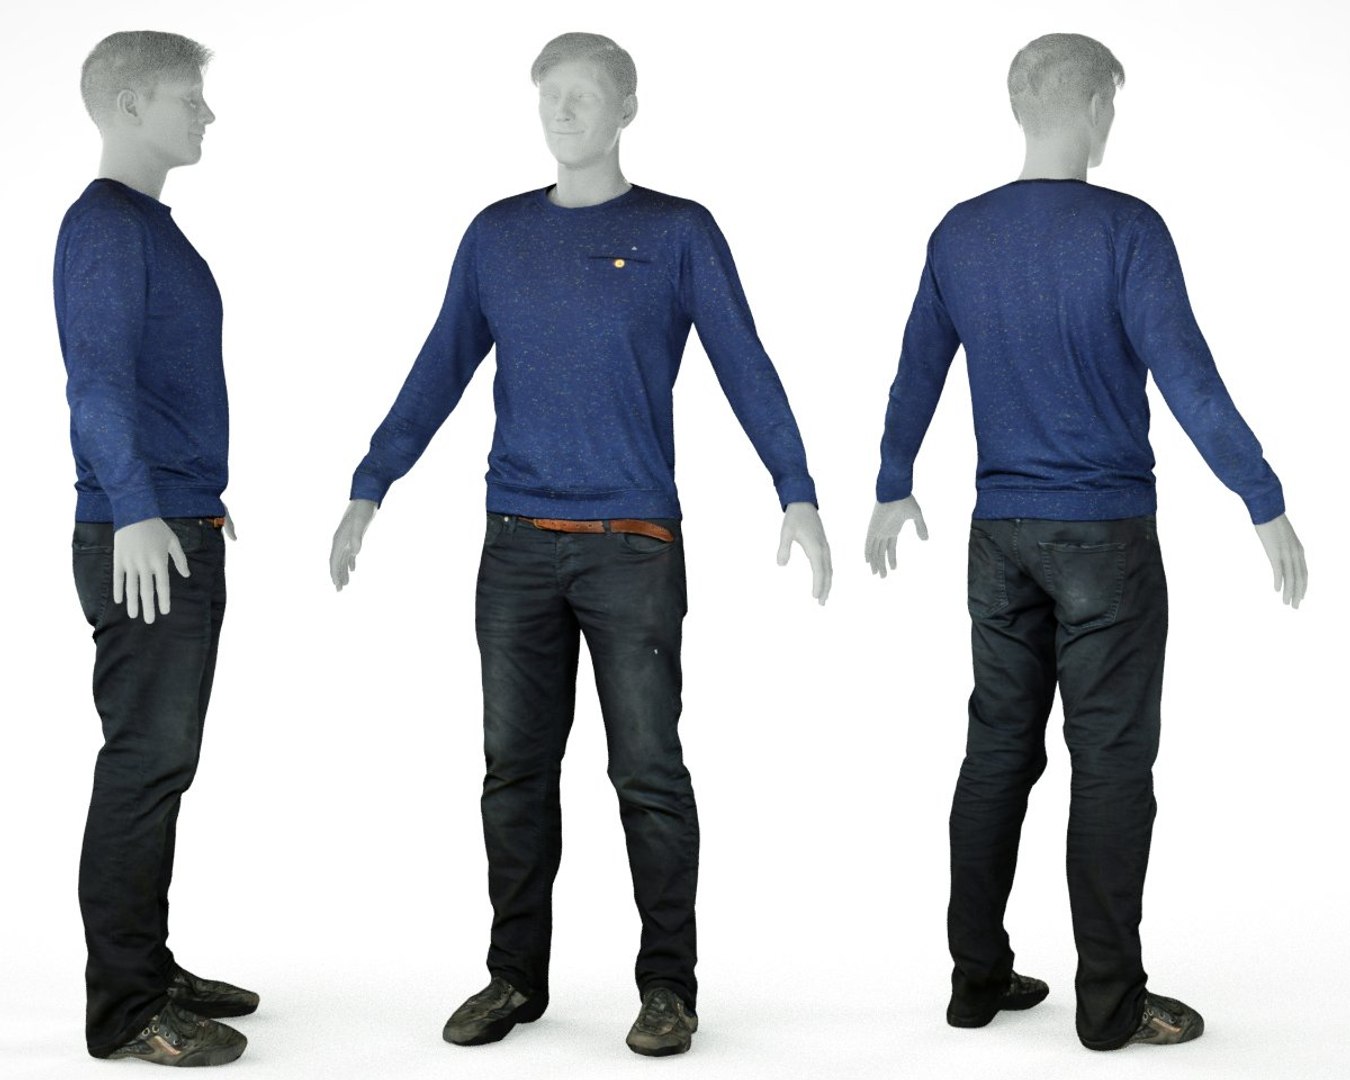 Male clothing outfit 3D model - TurboSquid 1329723